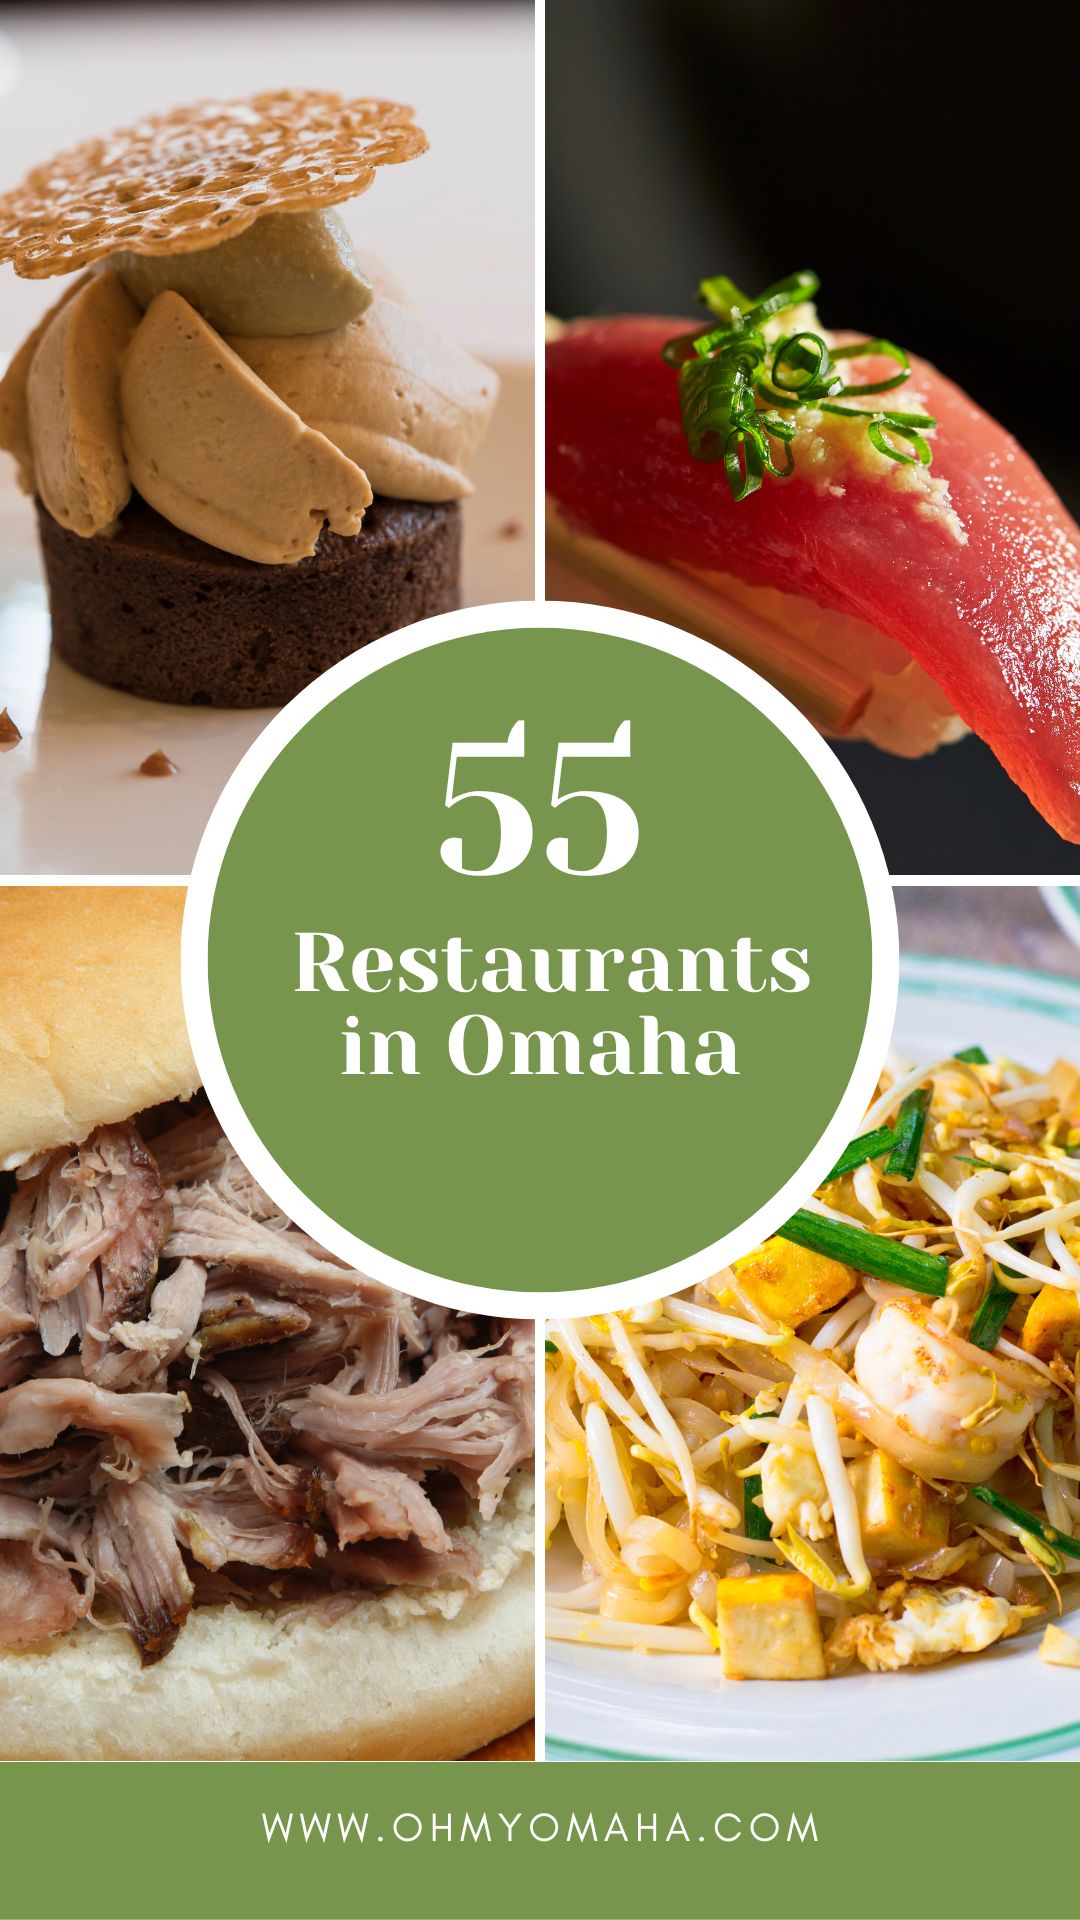 A roundup of the best Omaha restaurants with innovative chefs, unique dining experiences and unforgettable desserts.